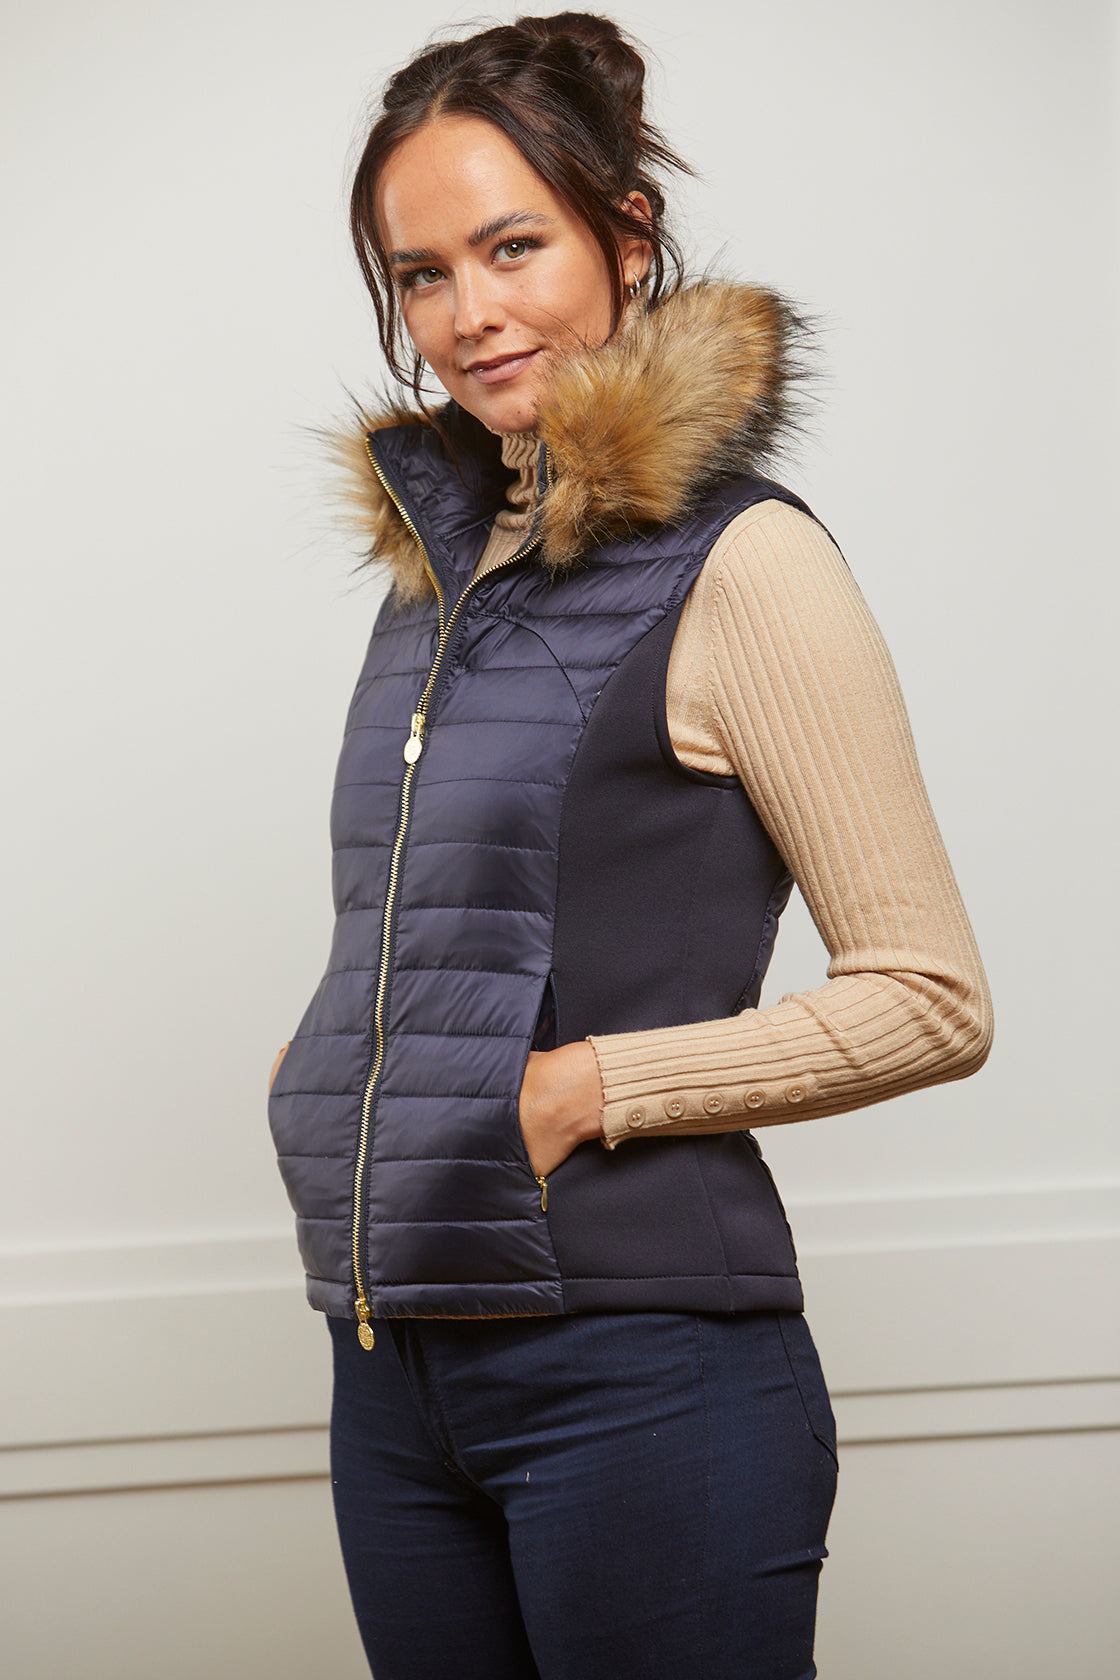 Women's navy puffer gilet with detachable faux fur collar and branded gold zip